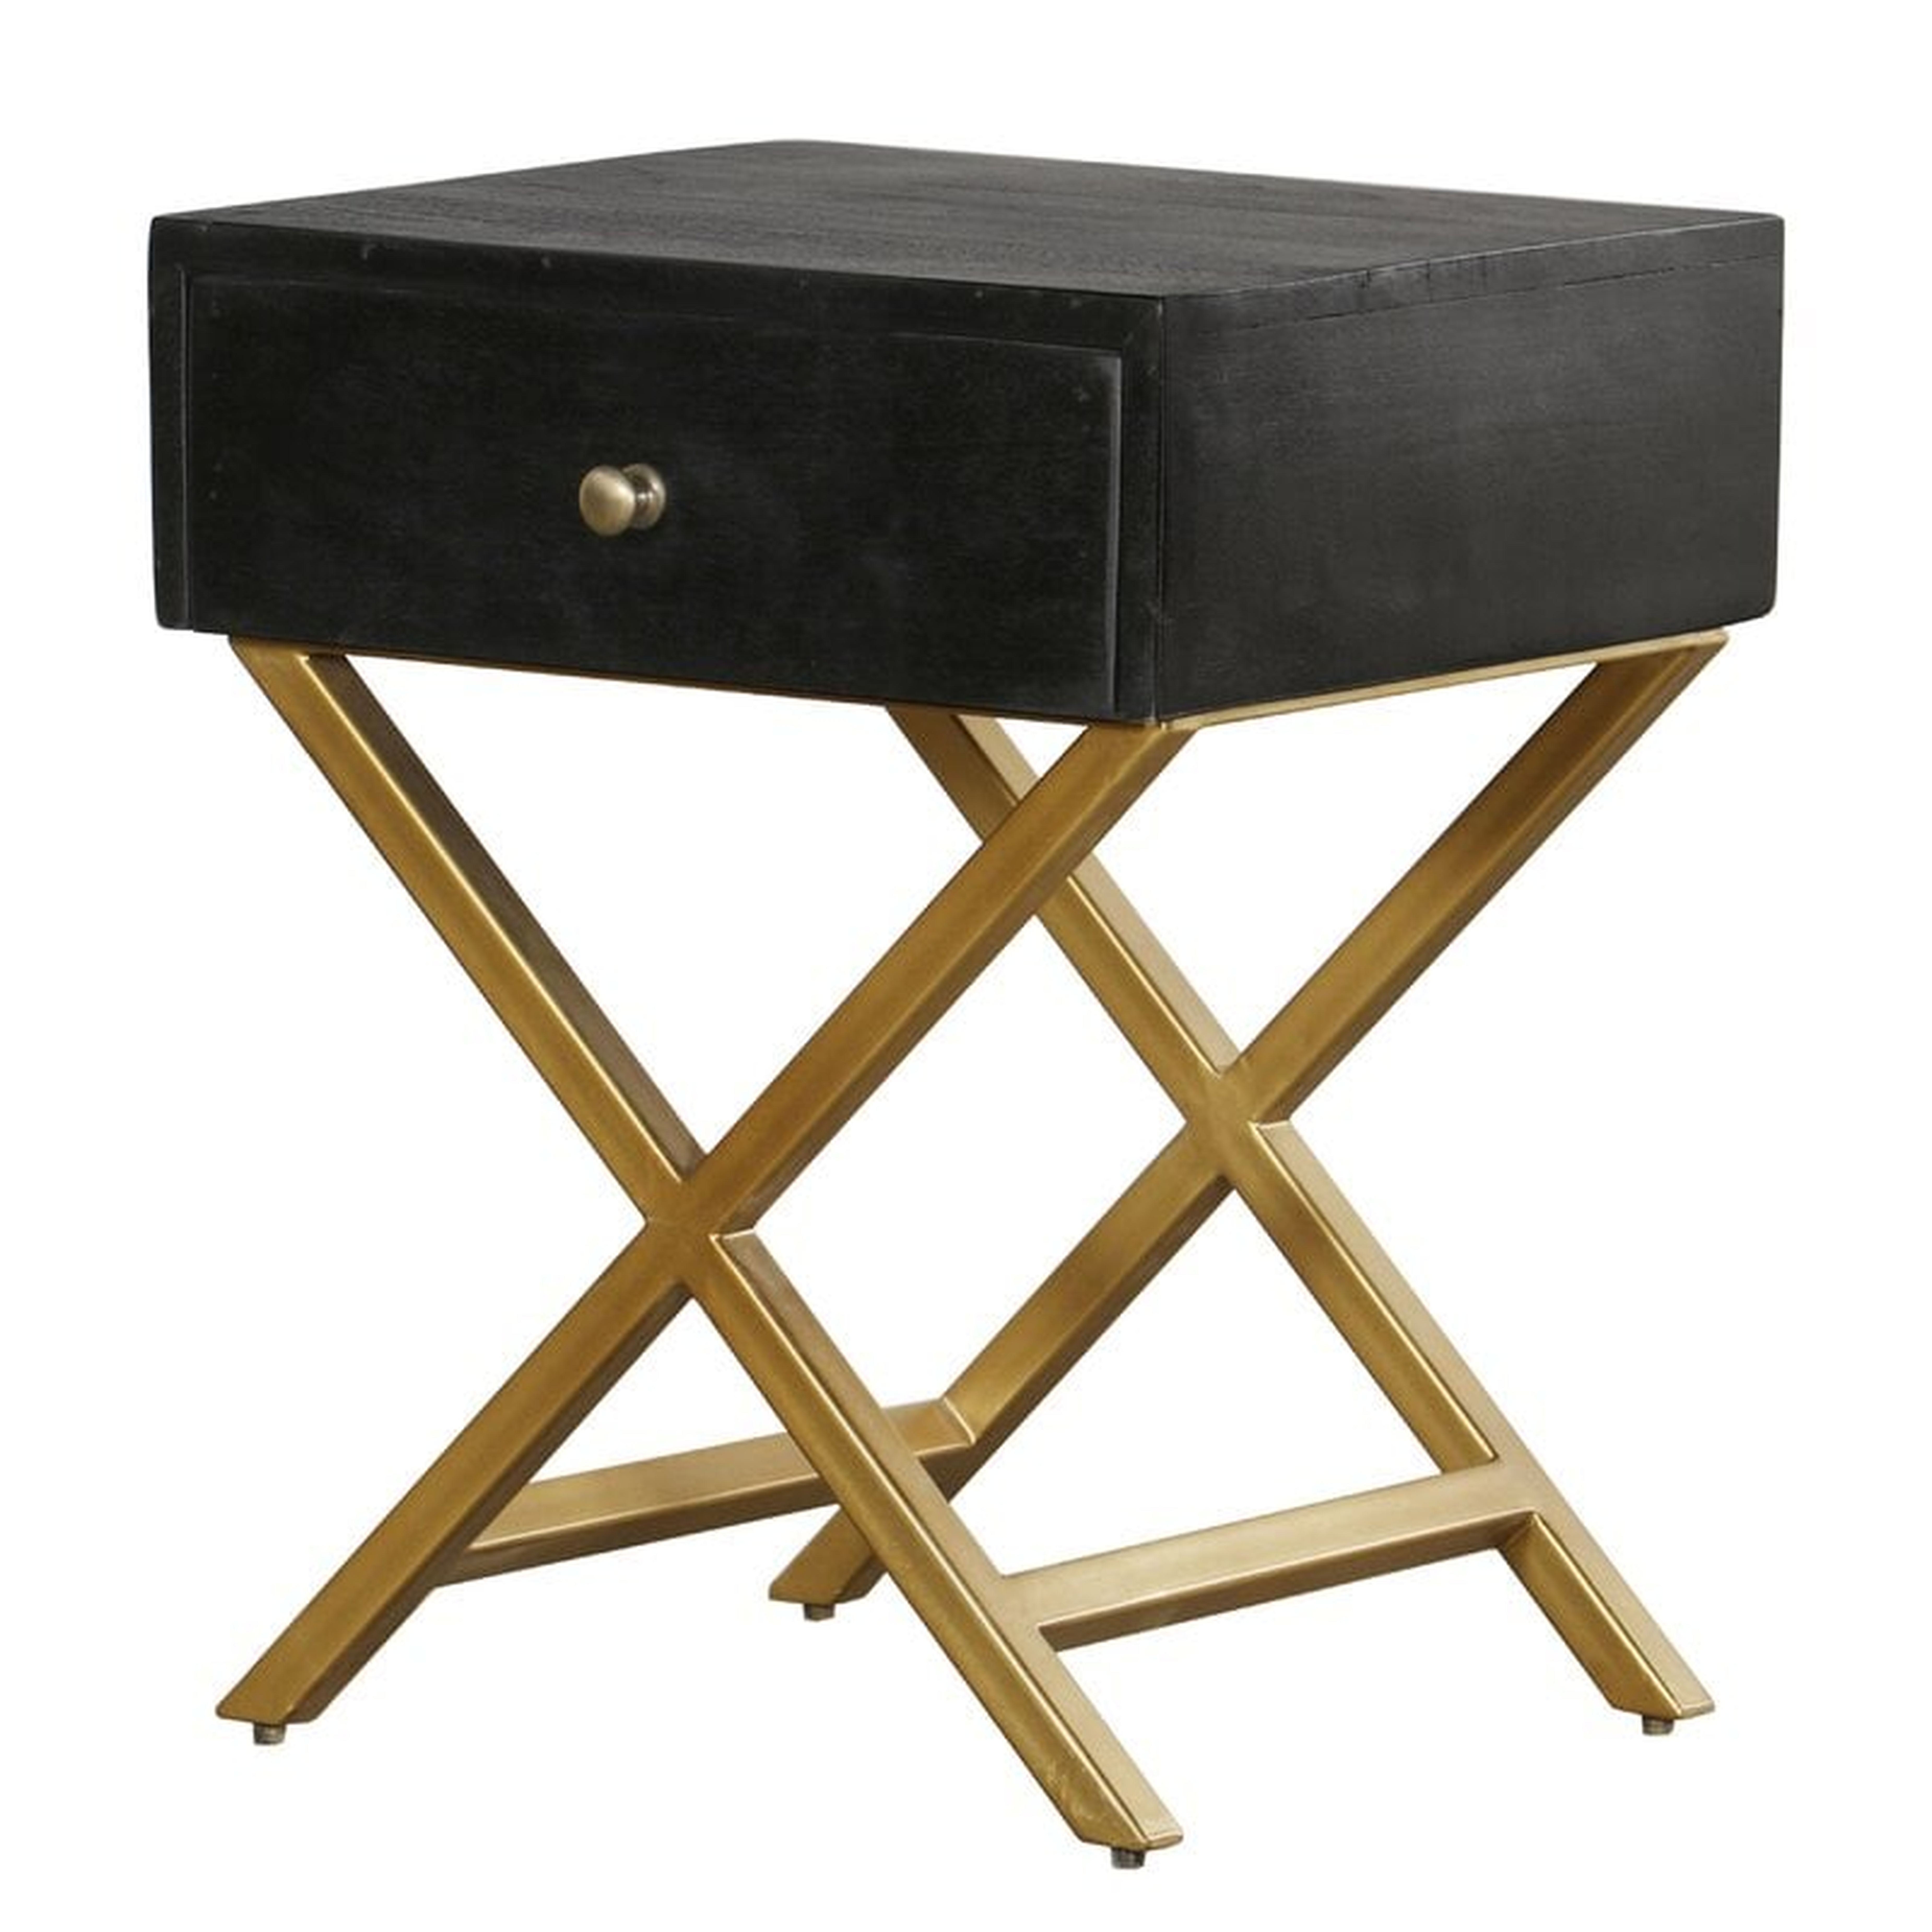 Black & Brass Side Table With Drawer - Wayfair